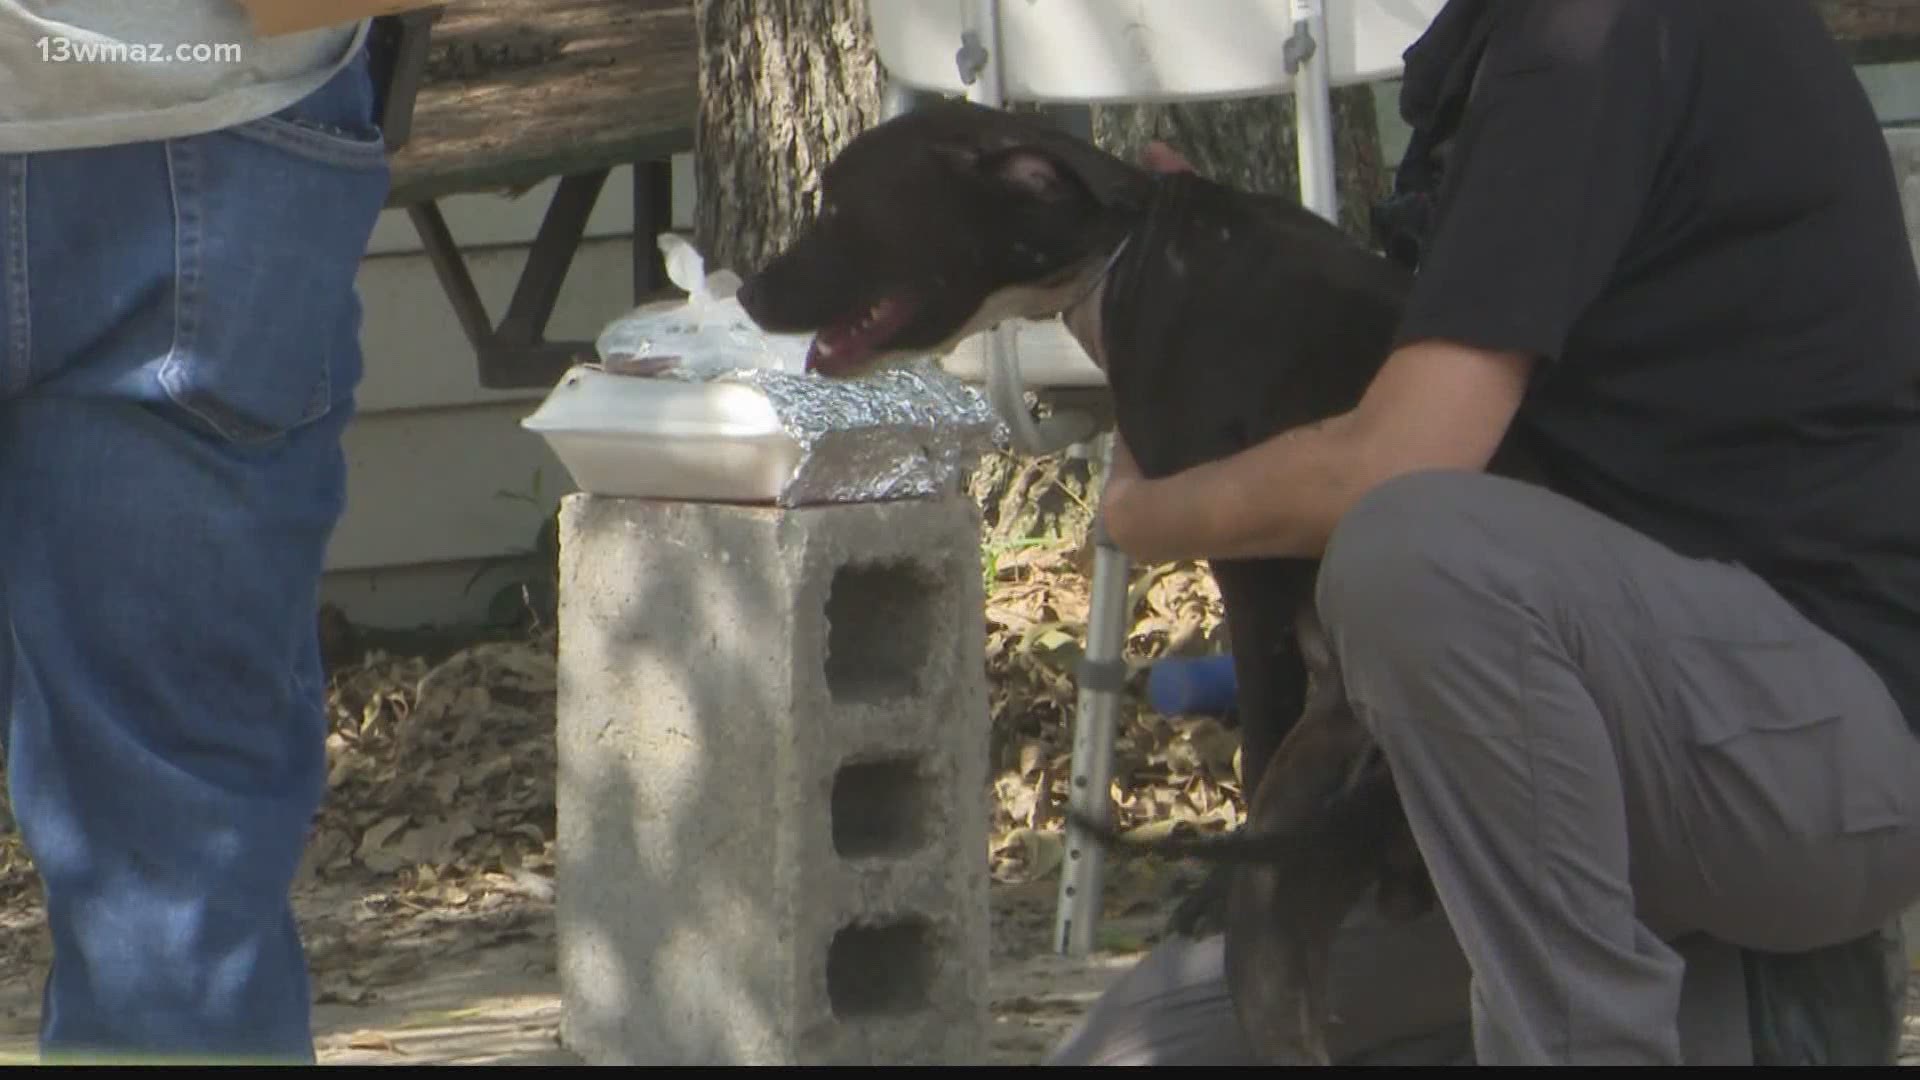 A Macon father and his son are facing charges after an eviction turned into a dog fighting investigation Wednesday morning.